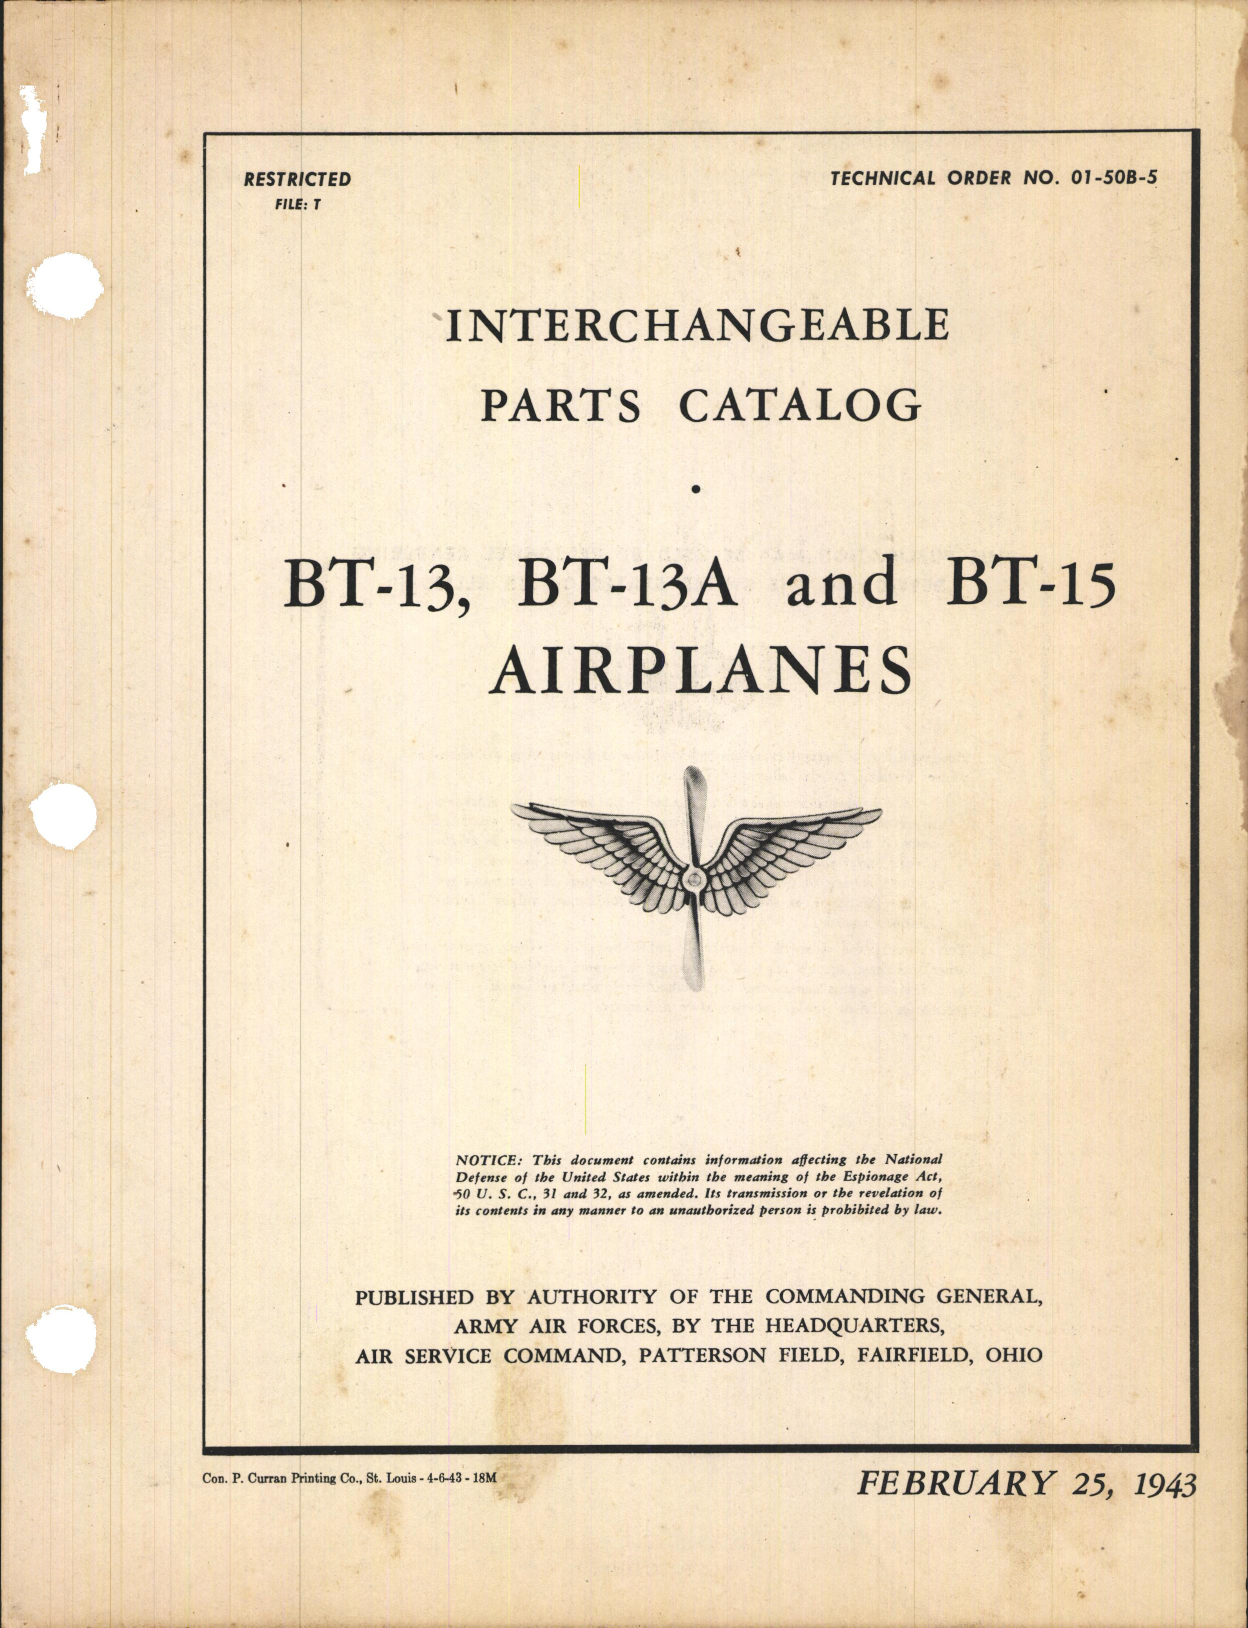 Sample page 1 from AirCorps Library document: Interchangeable Parts Catalog for BT-13, BT-13A, and BT-15 Airplanes